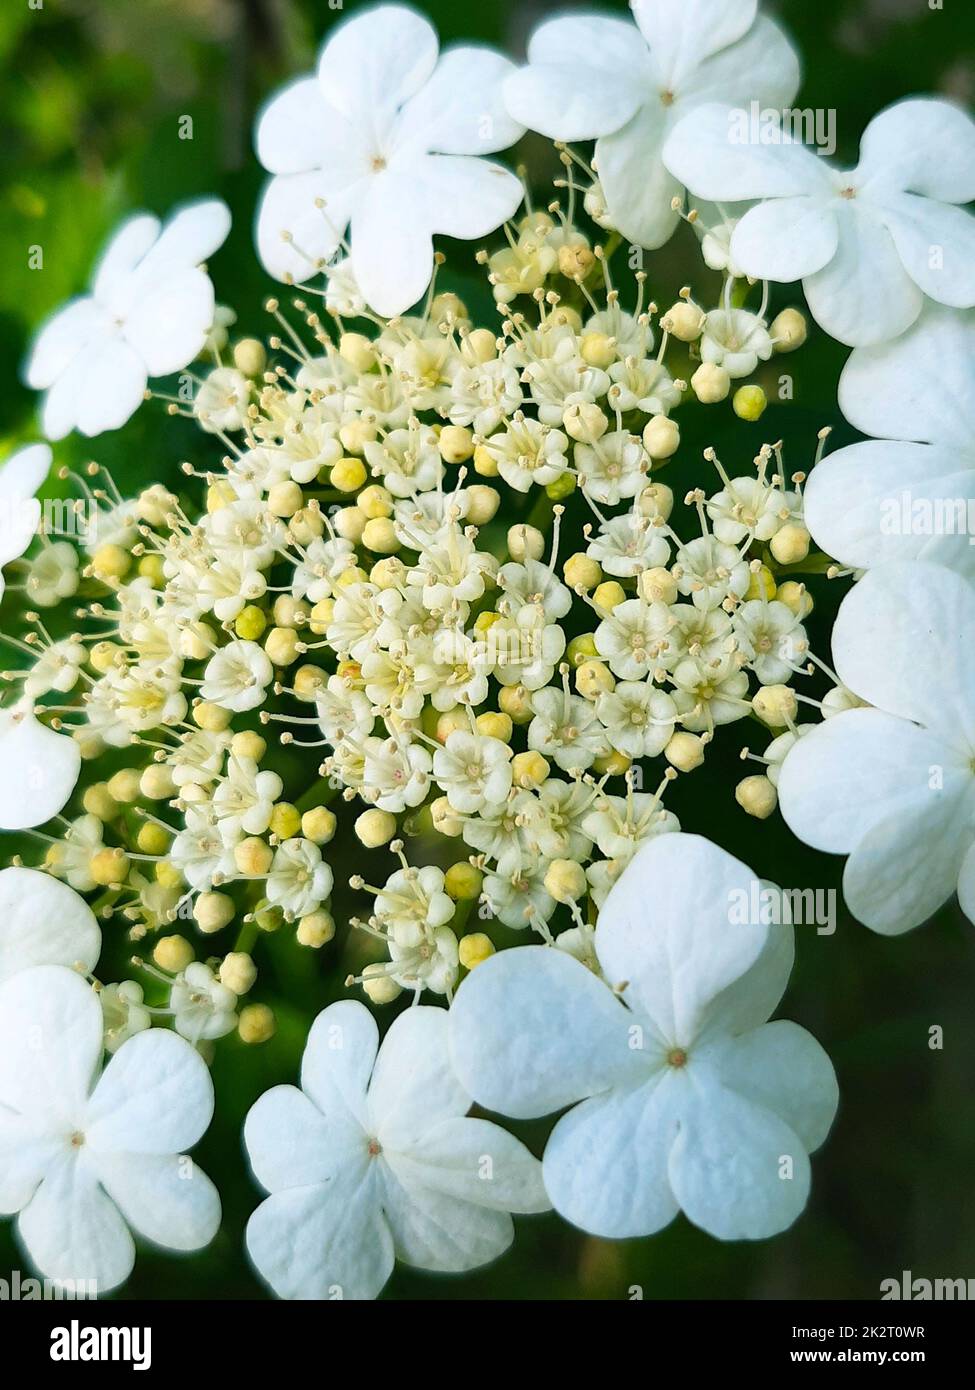 Viburnum flowers on a background of leaves close-up Stock Photo